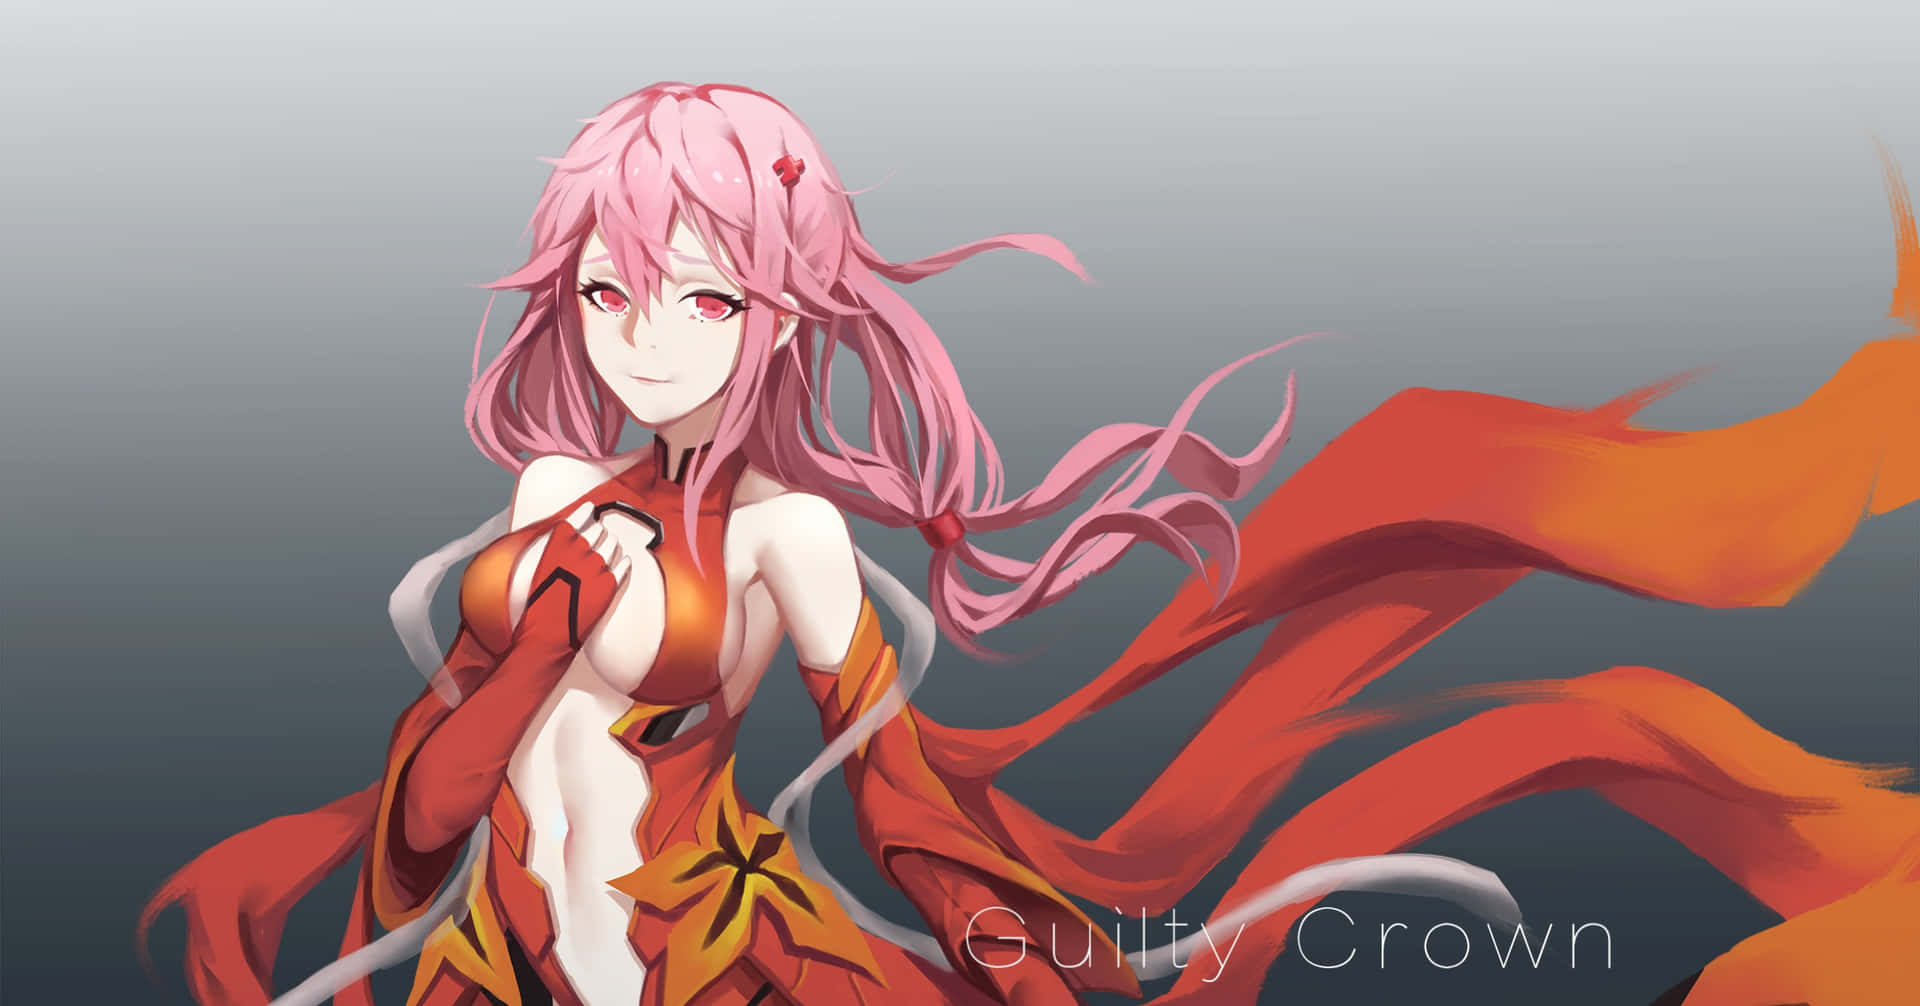 An Uprising of Youth - Guilty Crown